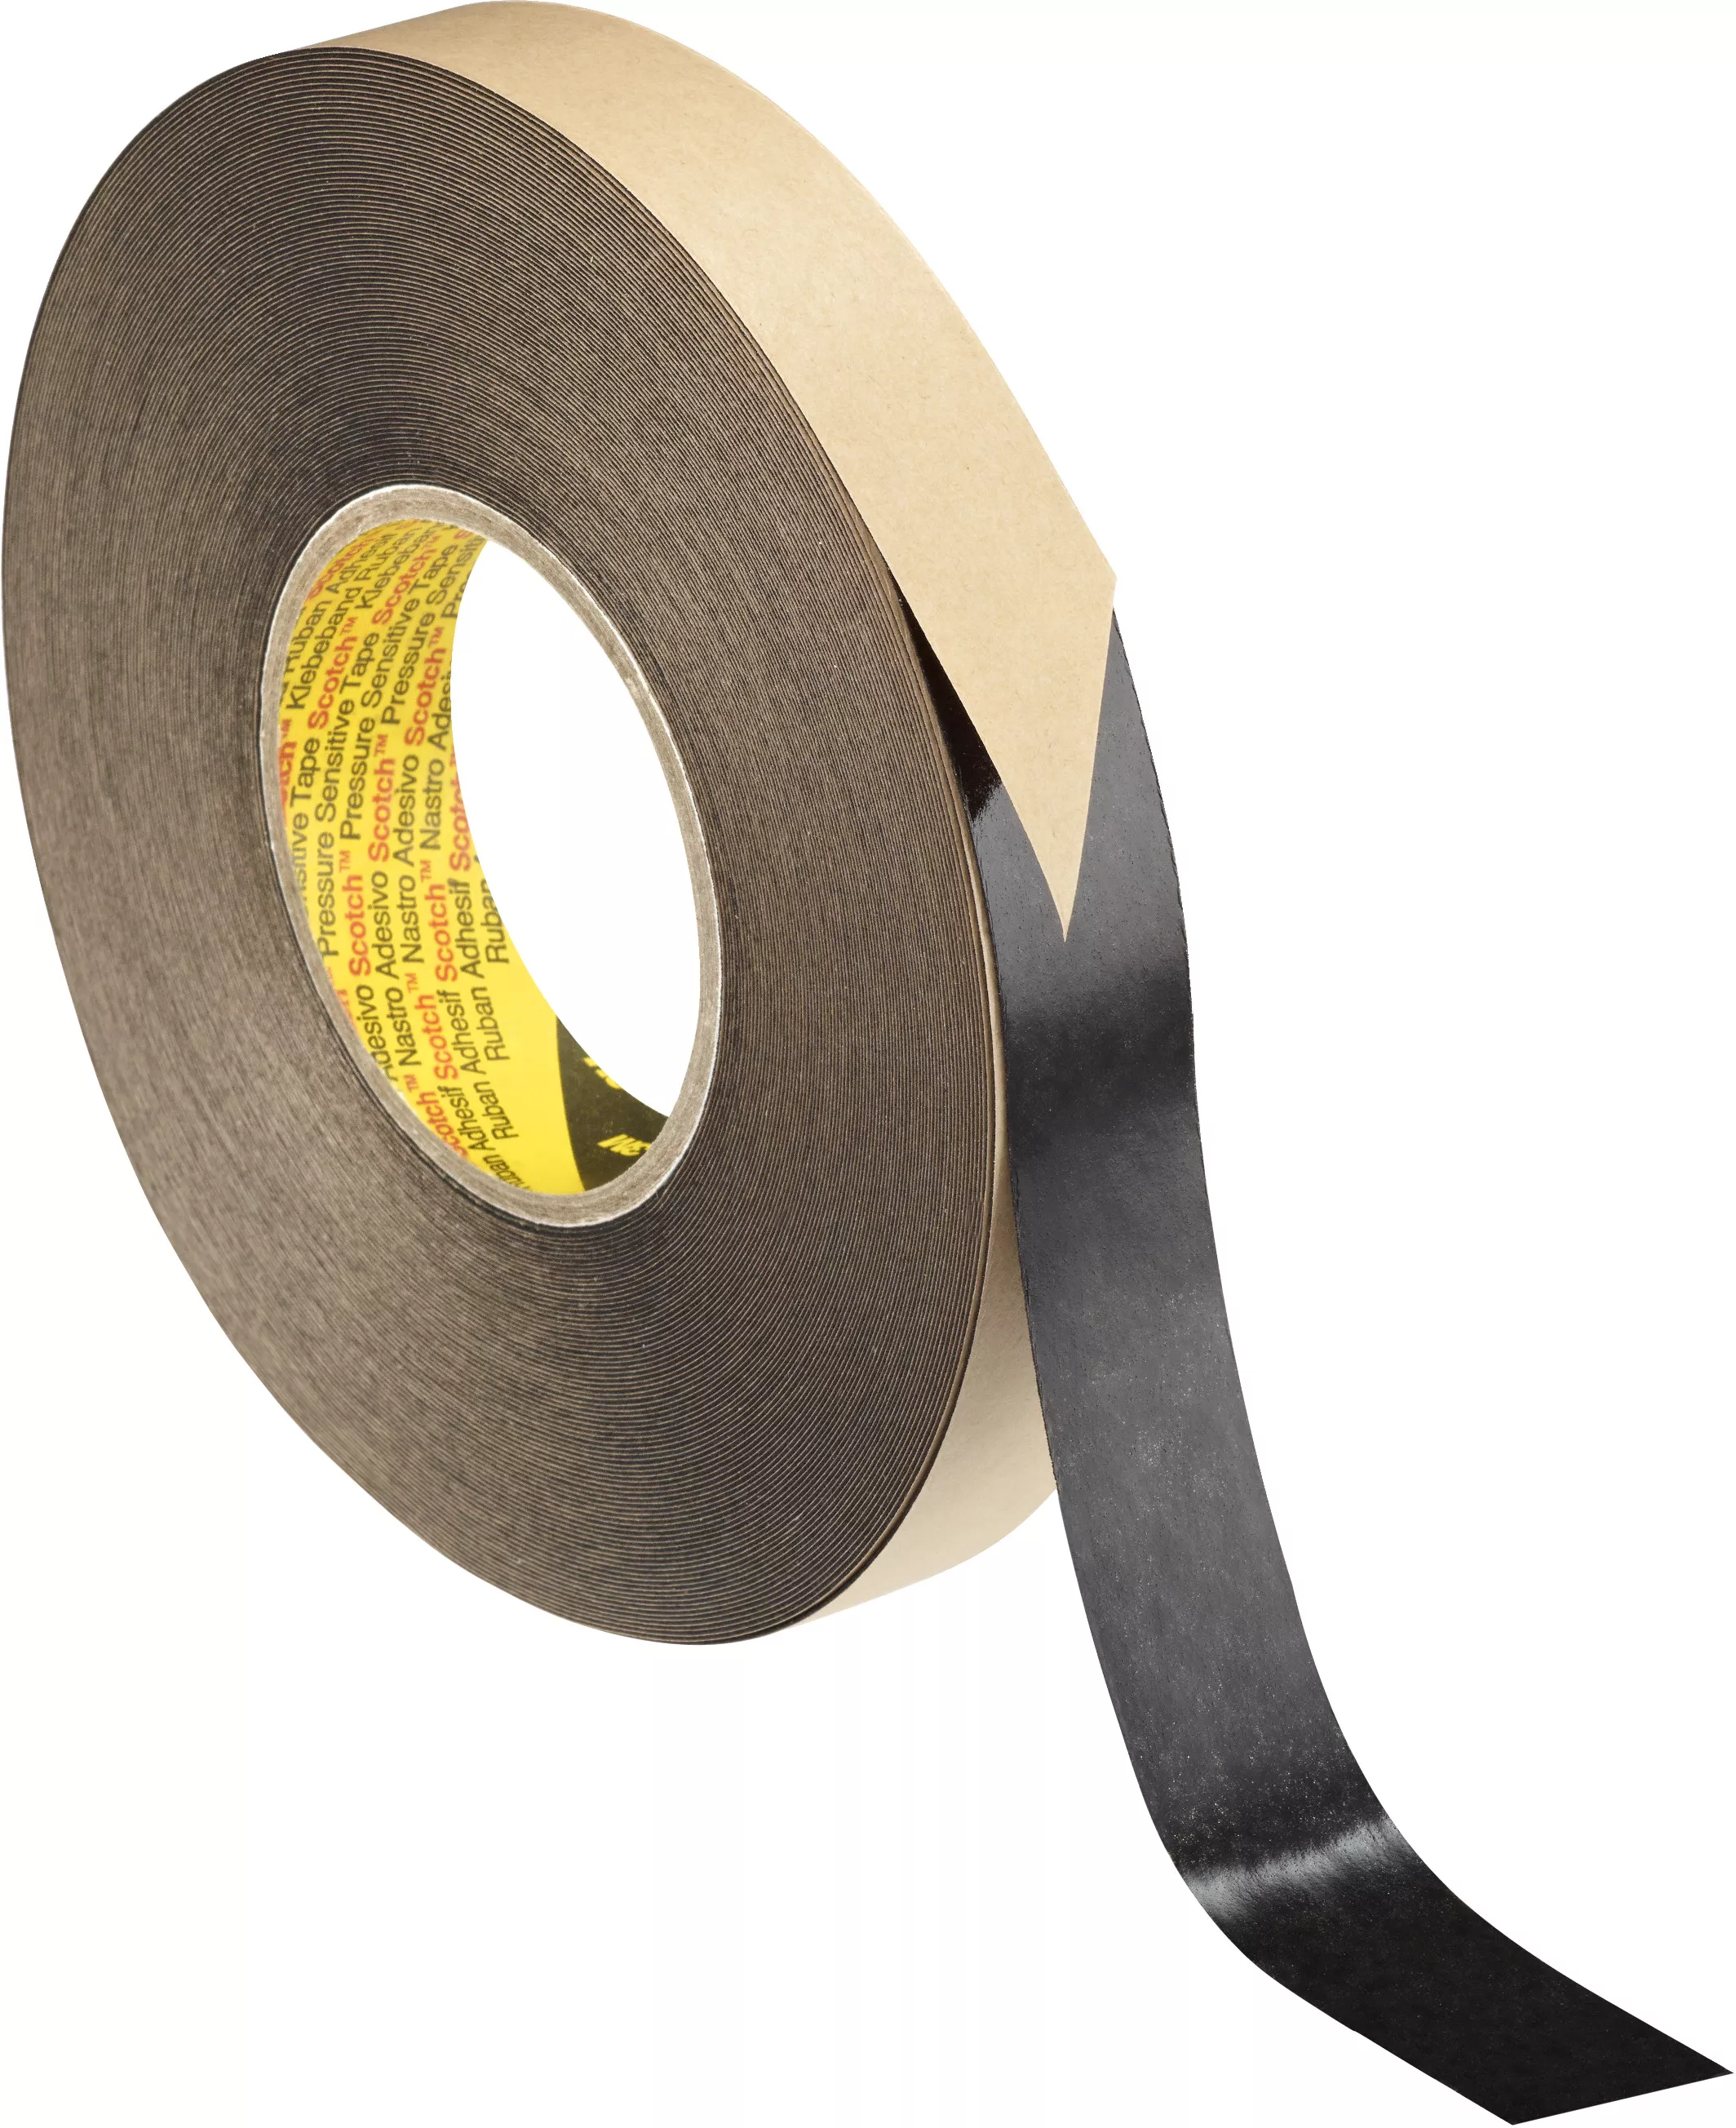 3M™ Conformable Sound Management Film Tape 9343, Black, 1 in x 36 yd, 1
roll per case